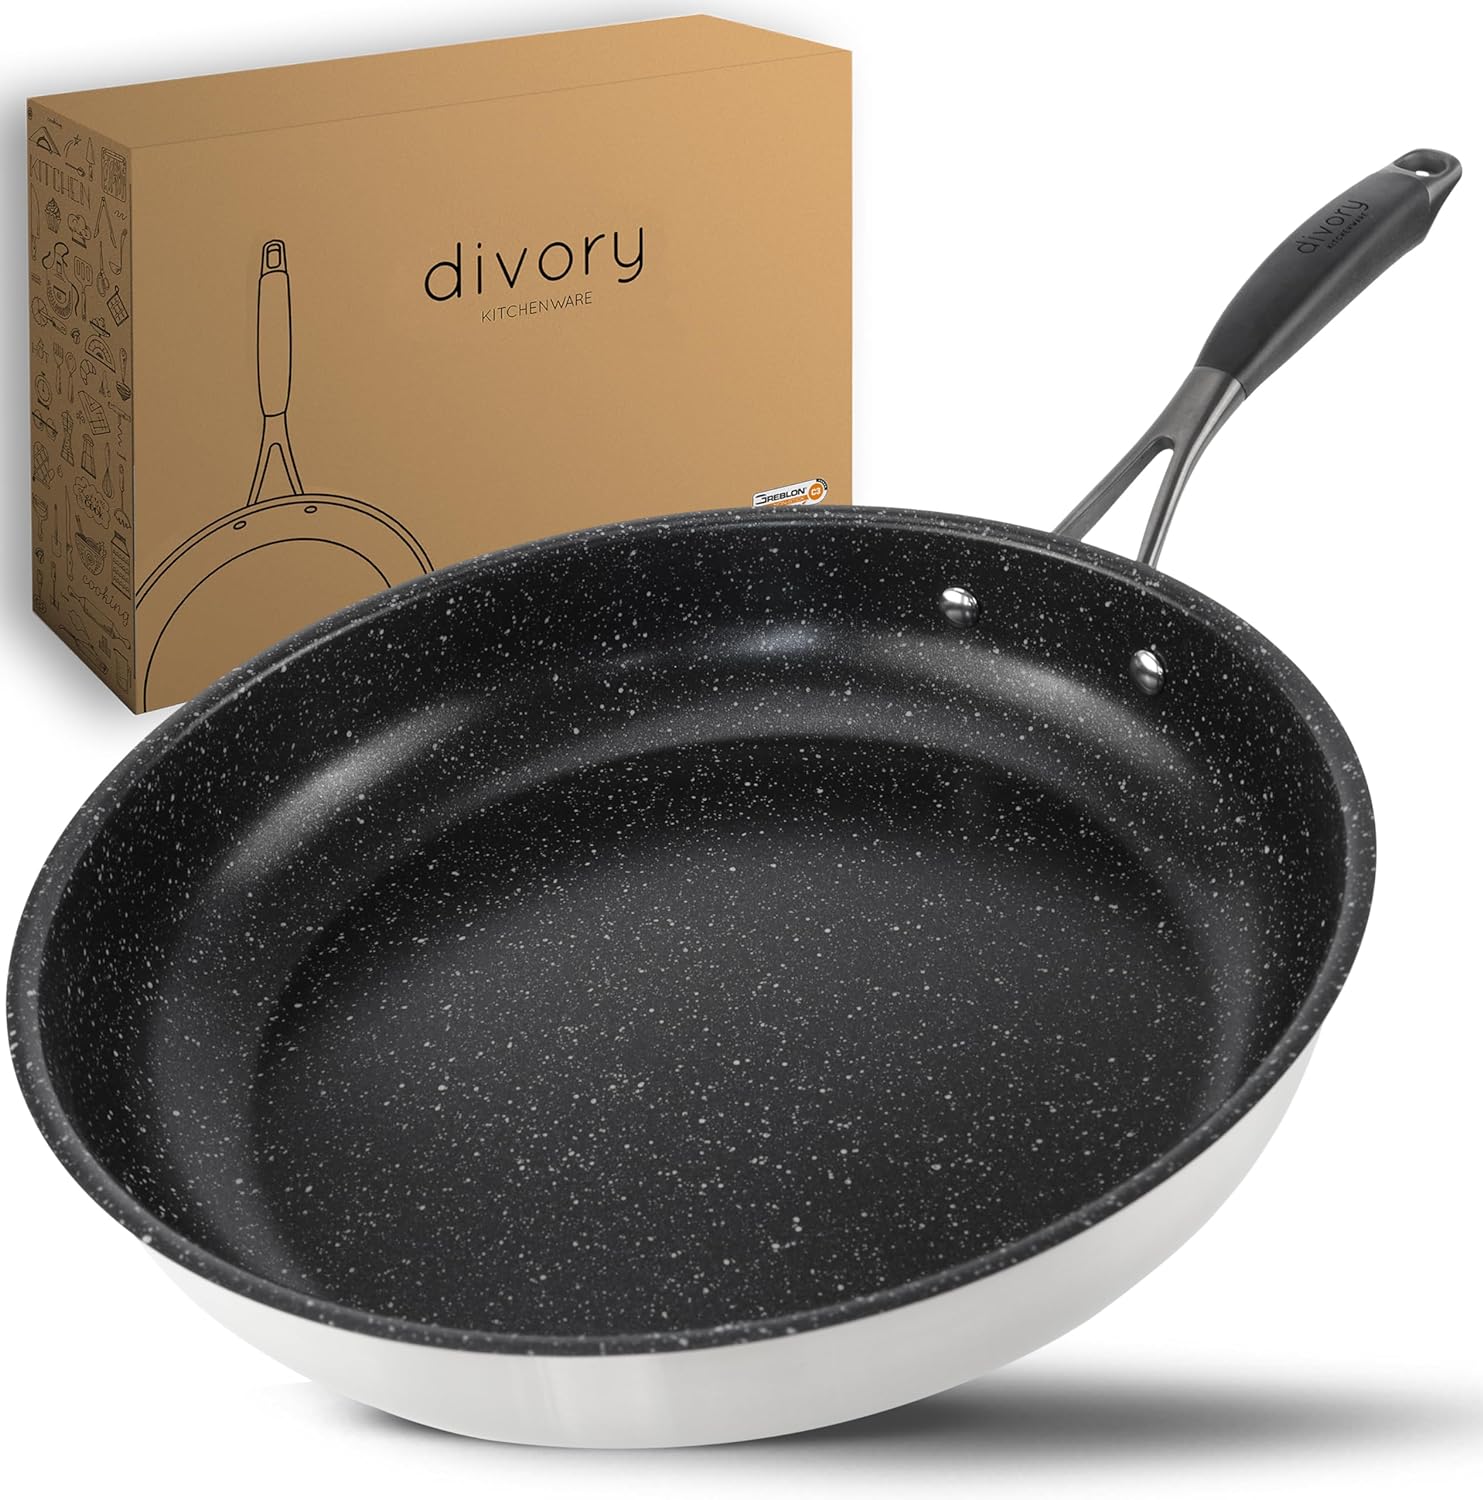 Divory stainless steel pan